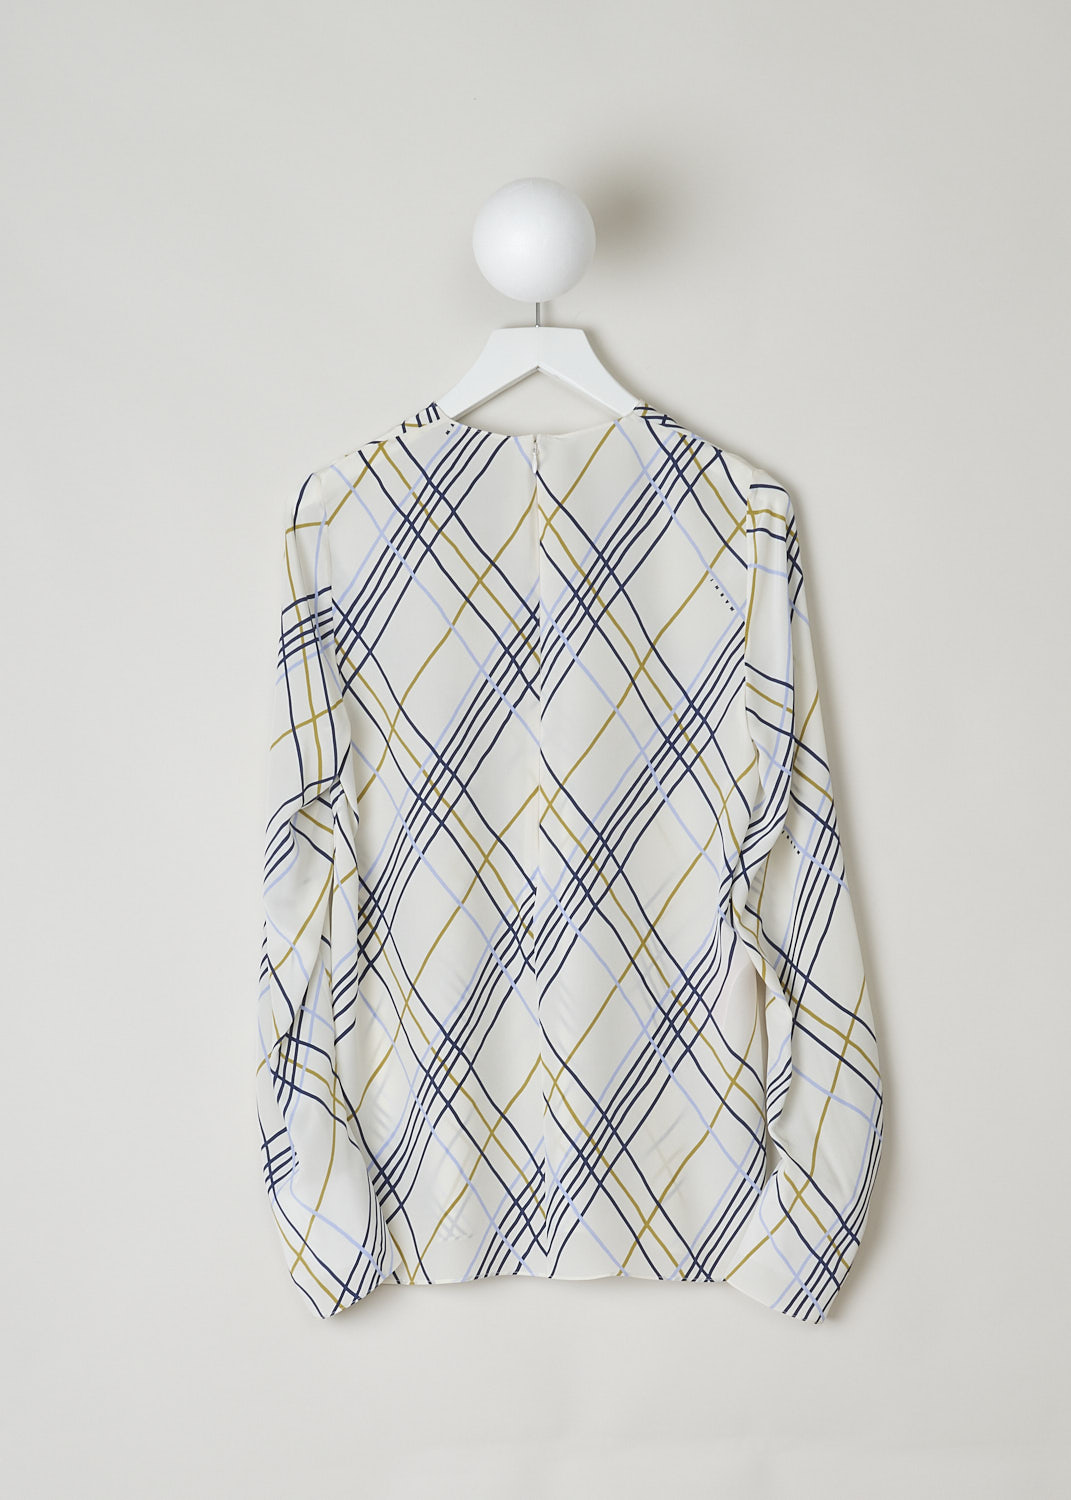 MARNI, SILK CROSS STRIPED TOP, CAMA0519A0_UTSF88_WRW06, White, Print, Blue, Back, This silk top has an off-white base with a colorful criss-cross stripe print. To one side, small Marni logo lettering can be found. The top has a ruched round neckline and that same ruching can be found on the long sleeves. The top has a straight hemline. In the back, a concealed centre zip functions as the closure option. 
